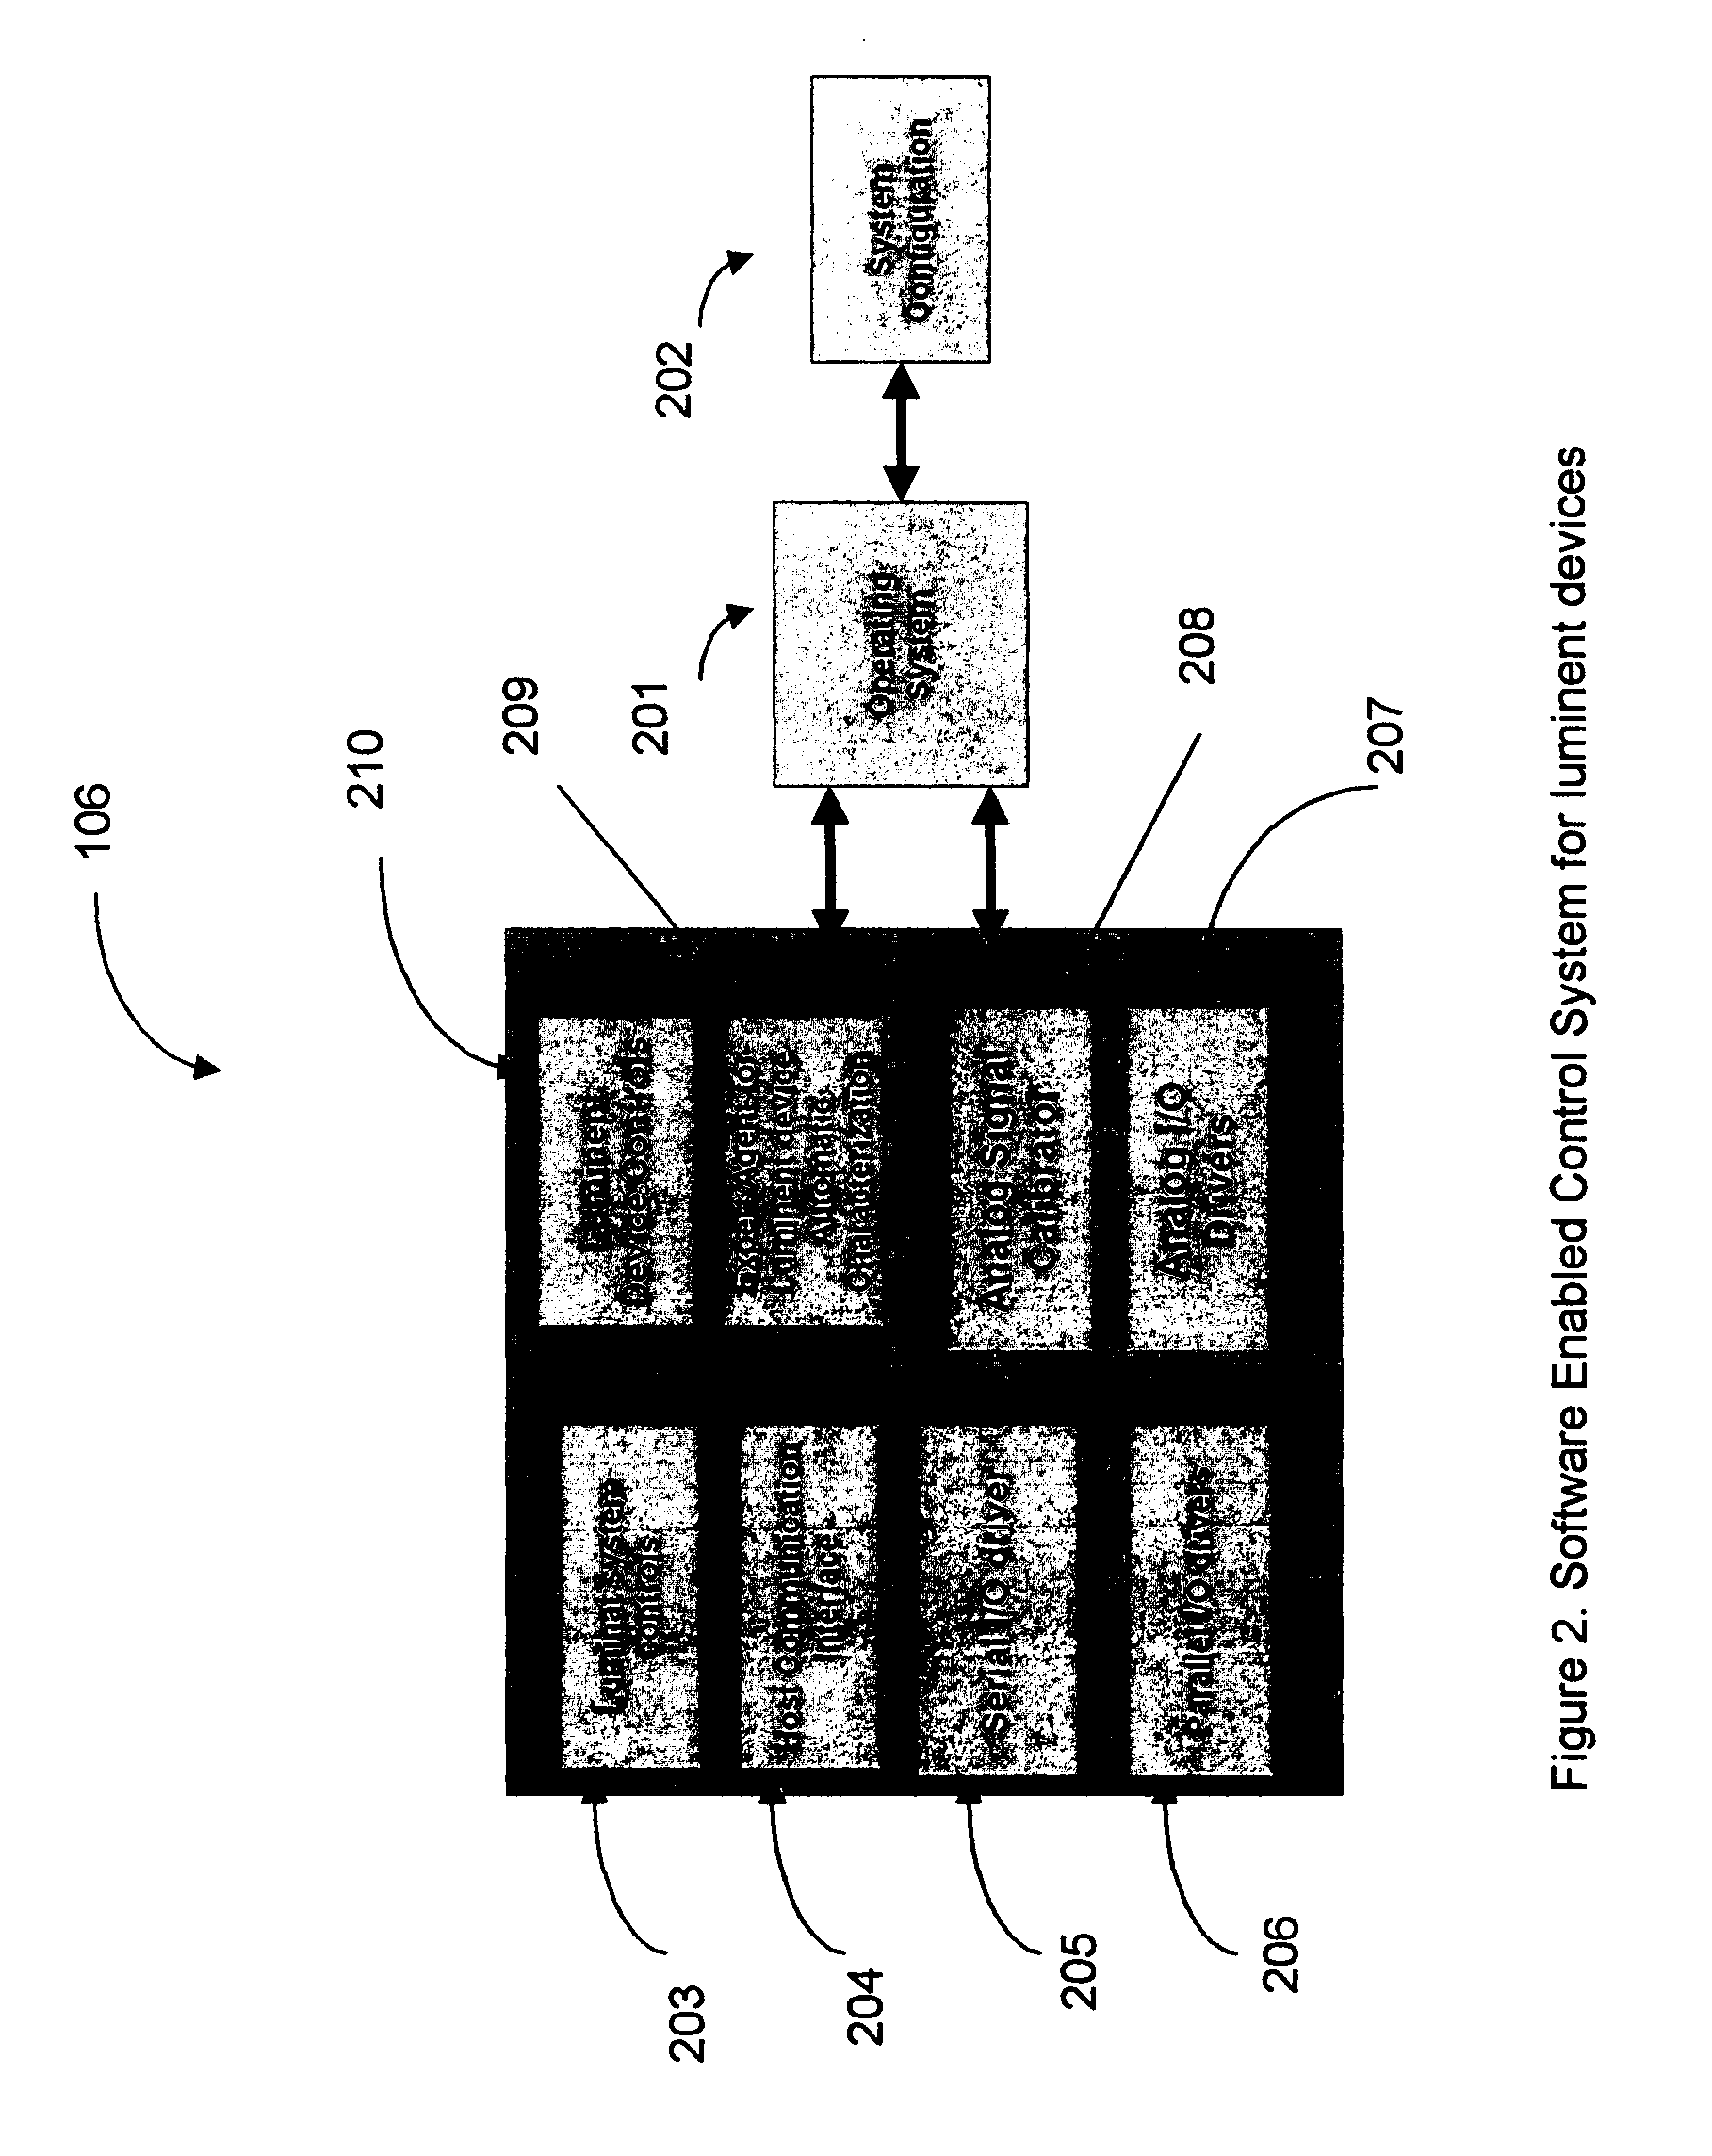 Software enabled control for systems with luminent devices